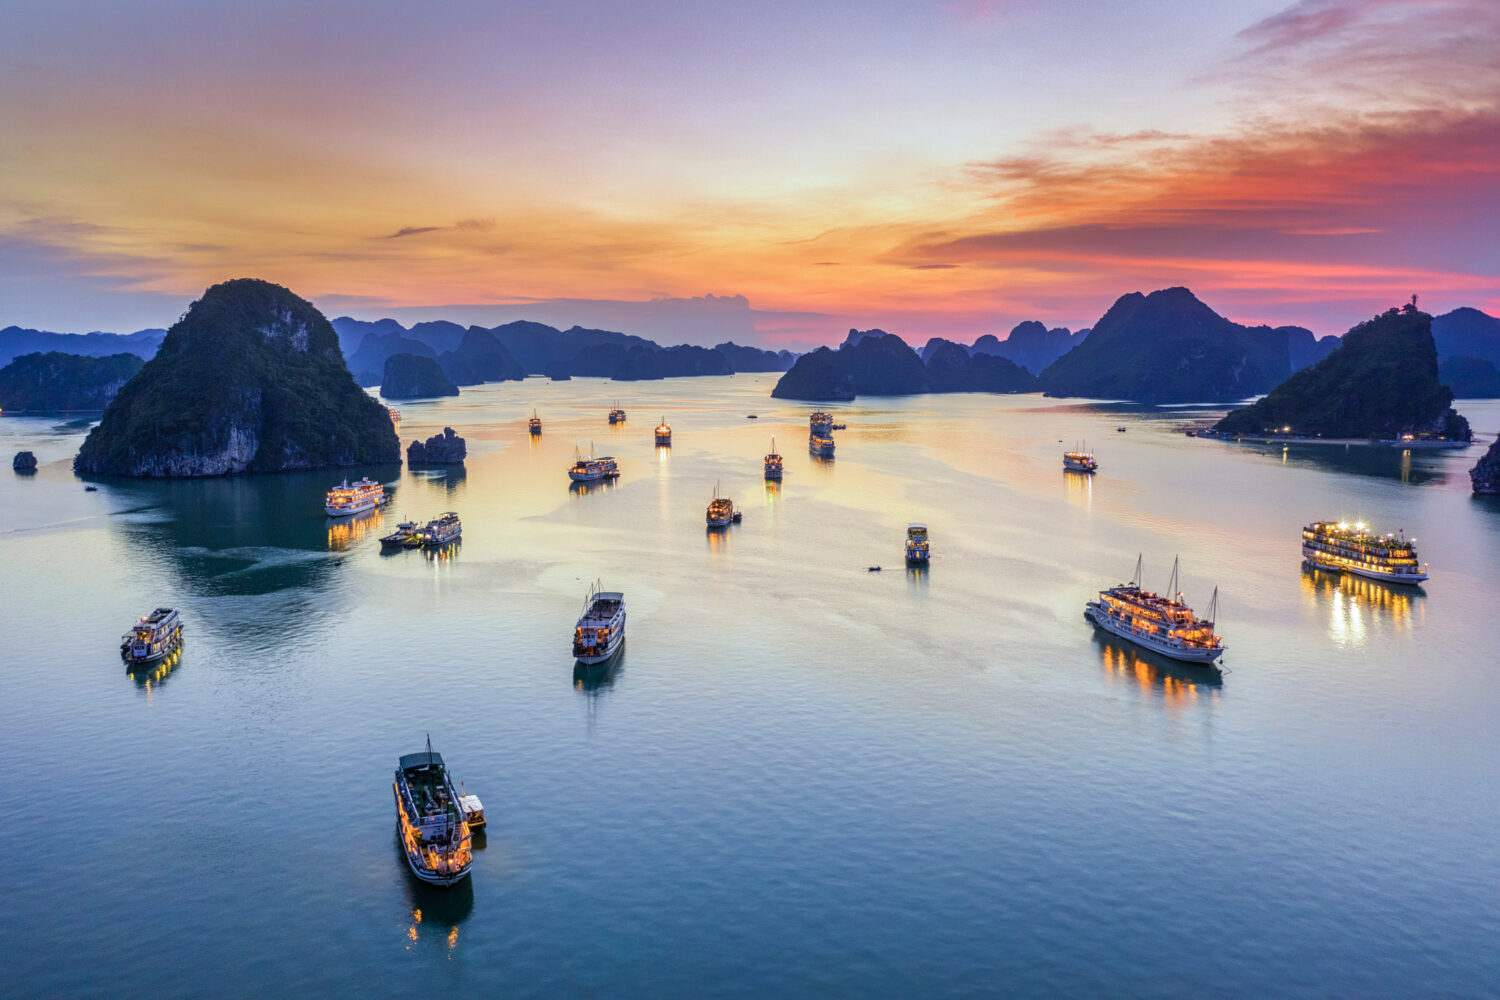 family holiday vietnam packages